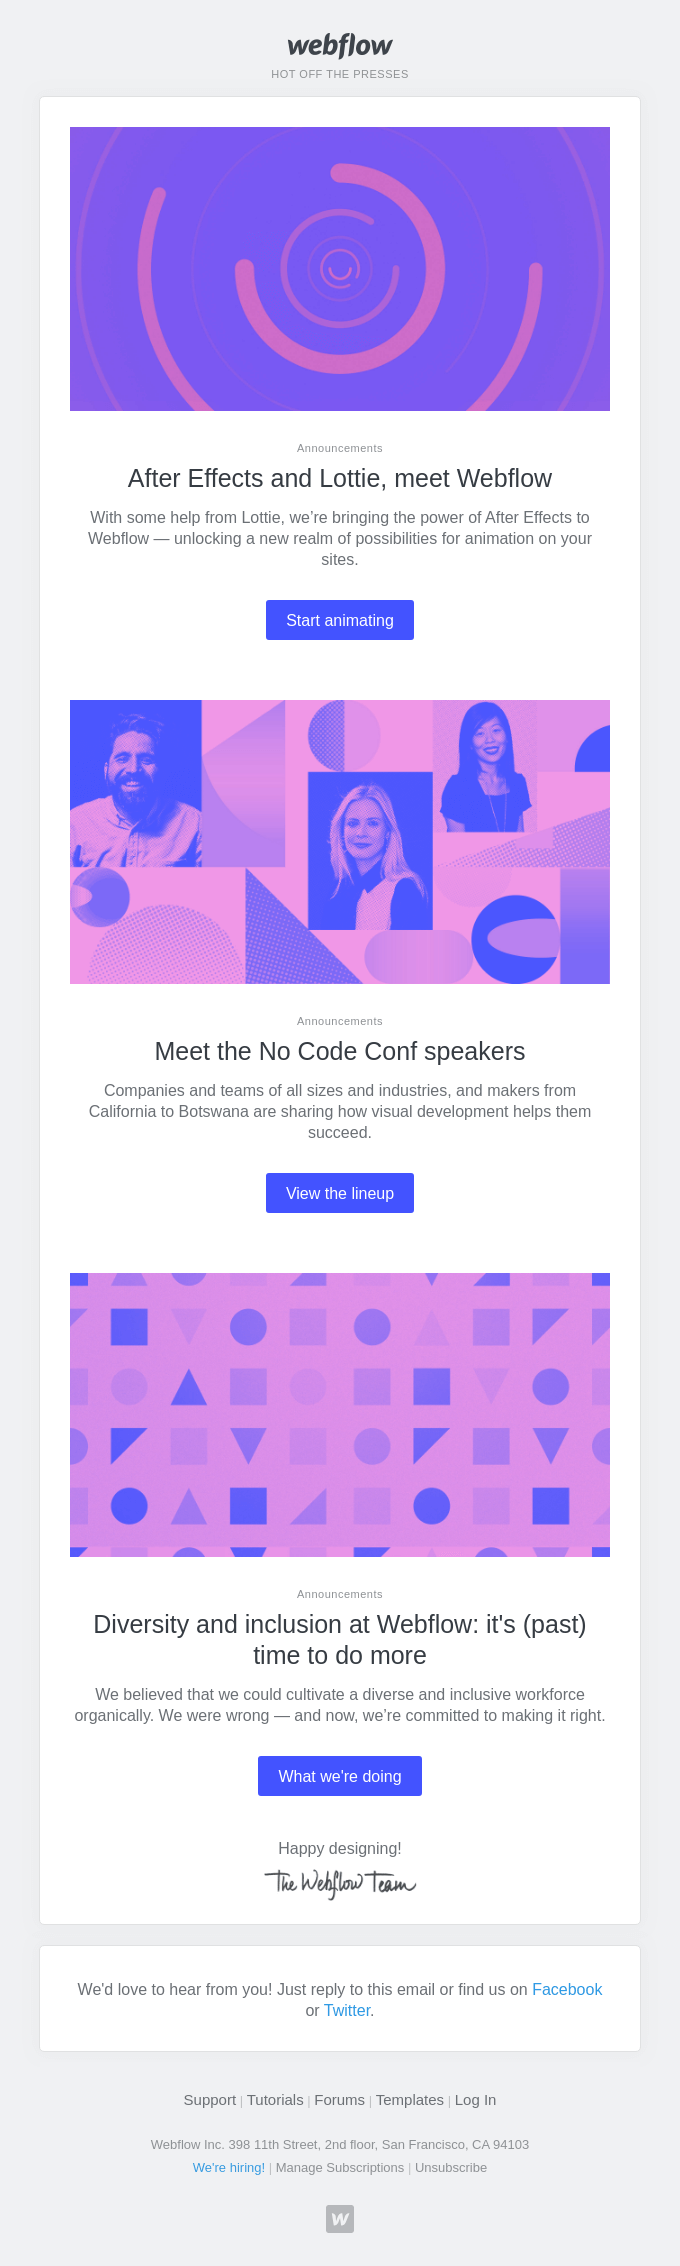 🎉 Lottie is here + 📣 No Code Conf speakers + 👥 Diversity at Webflow - Webflow Email Newsletter